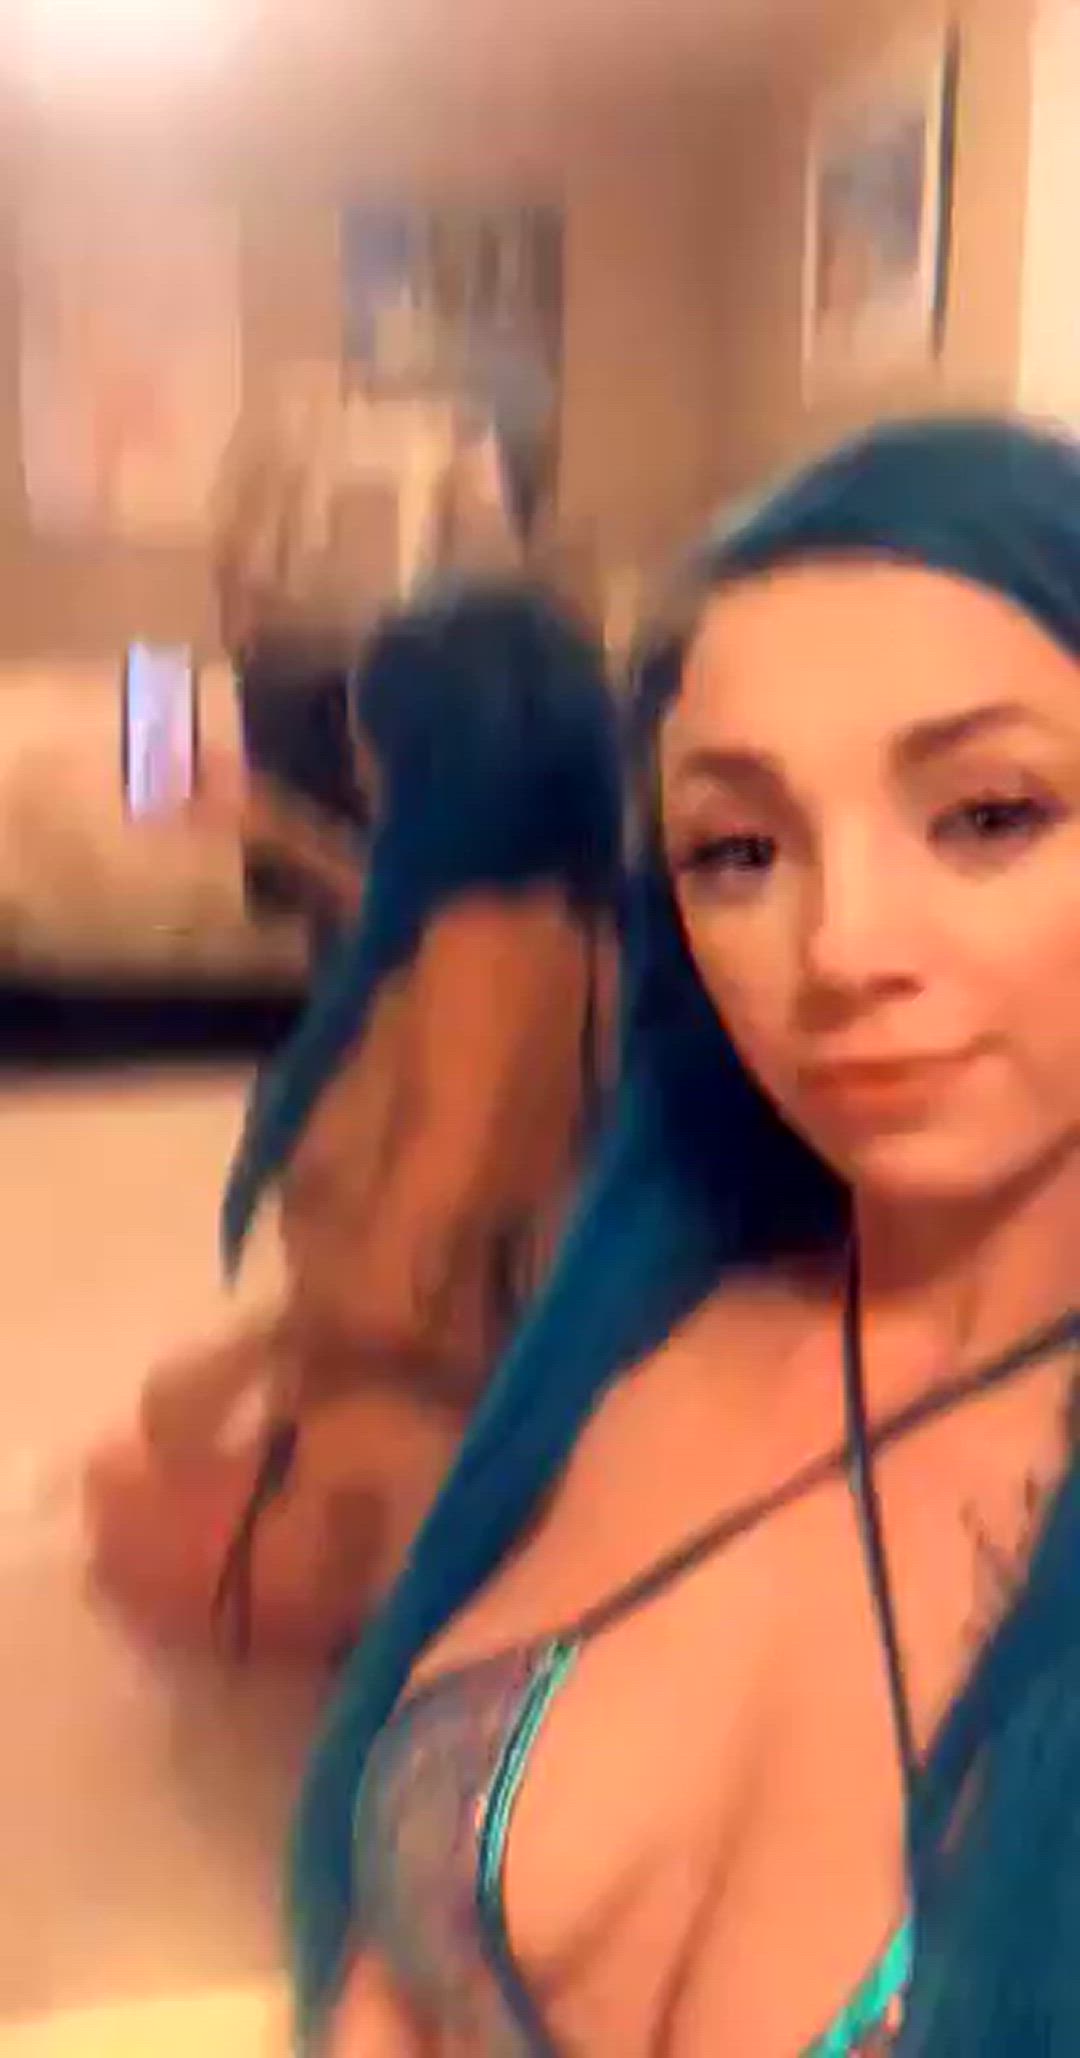 Ass porn video with onlyfans model linzeylohan <strong>@linzey_lohan</strong>